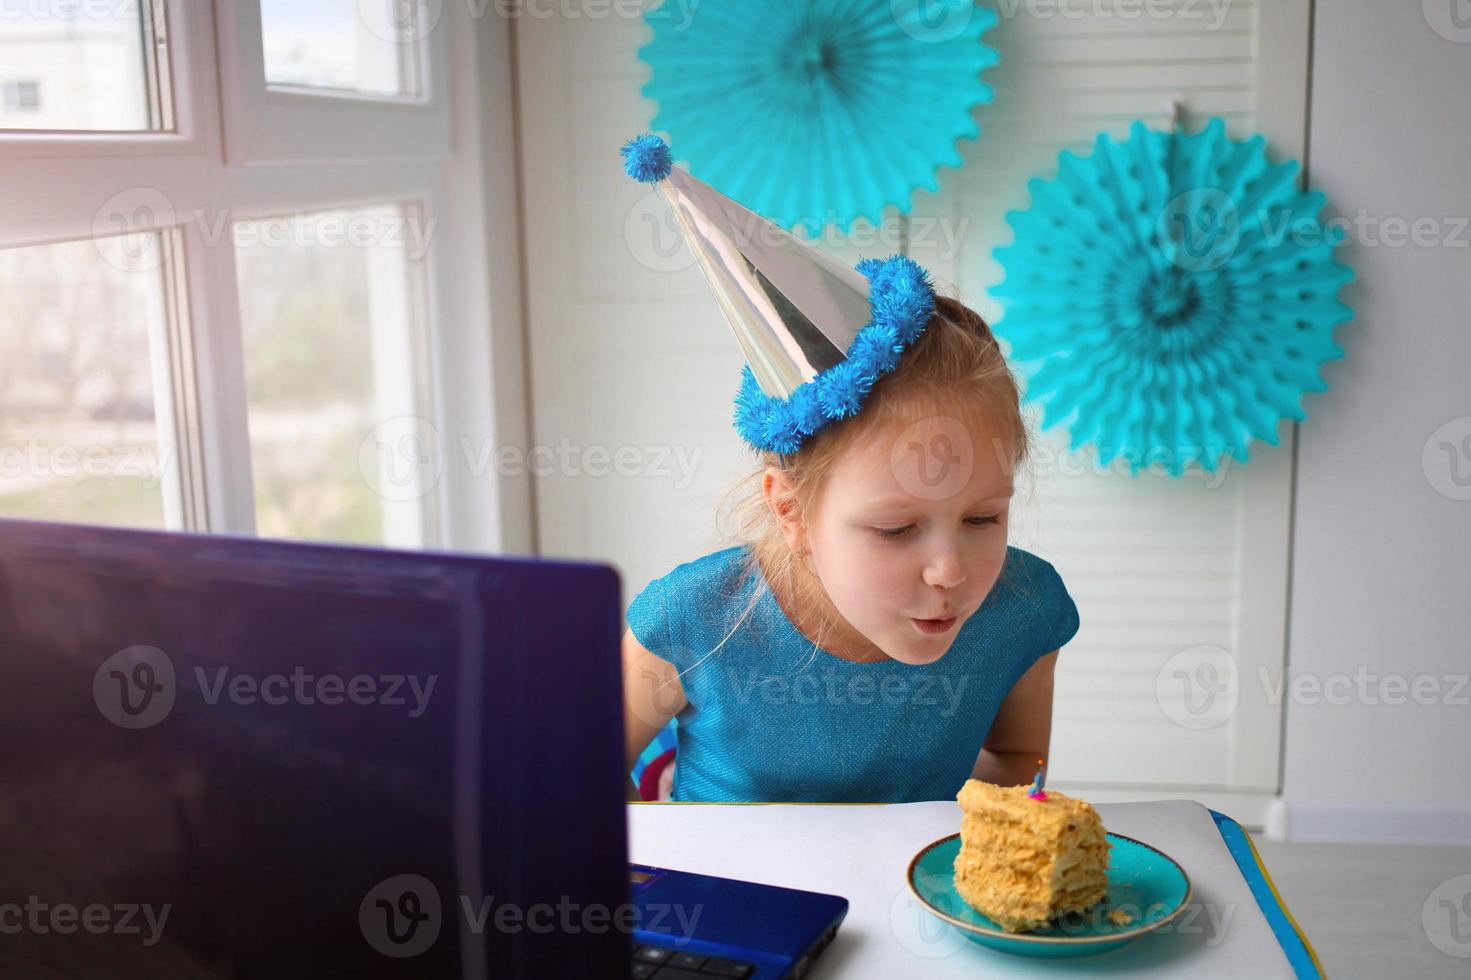 Little girl blows out a candle on a cake. Celebrating birthday via internet in quarantine time, self-isolation photo